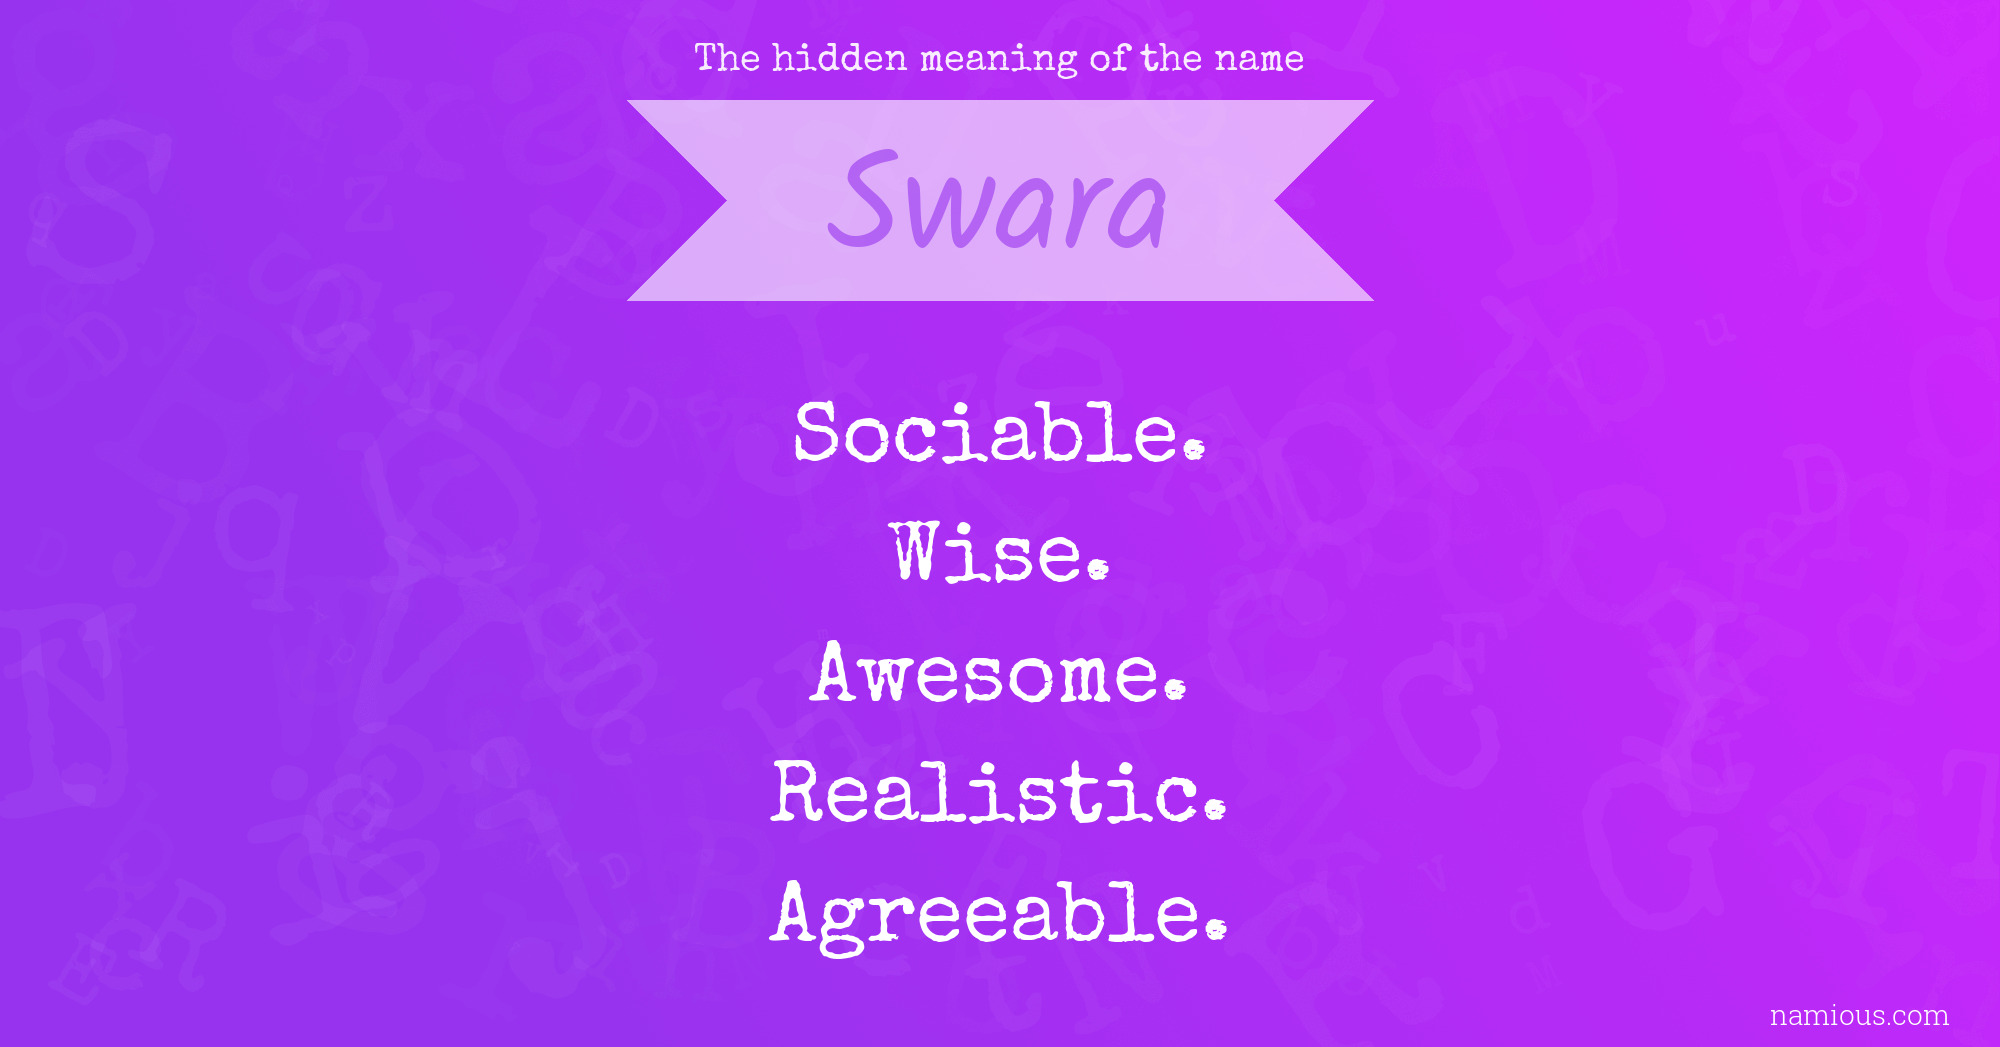 The hidden meaning of the name Swara | Namious